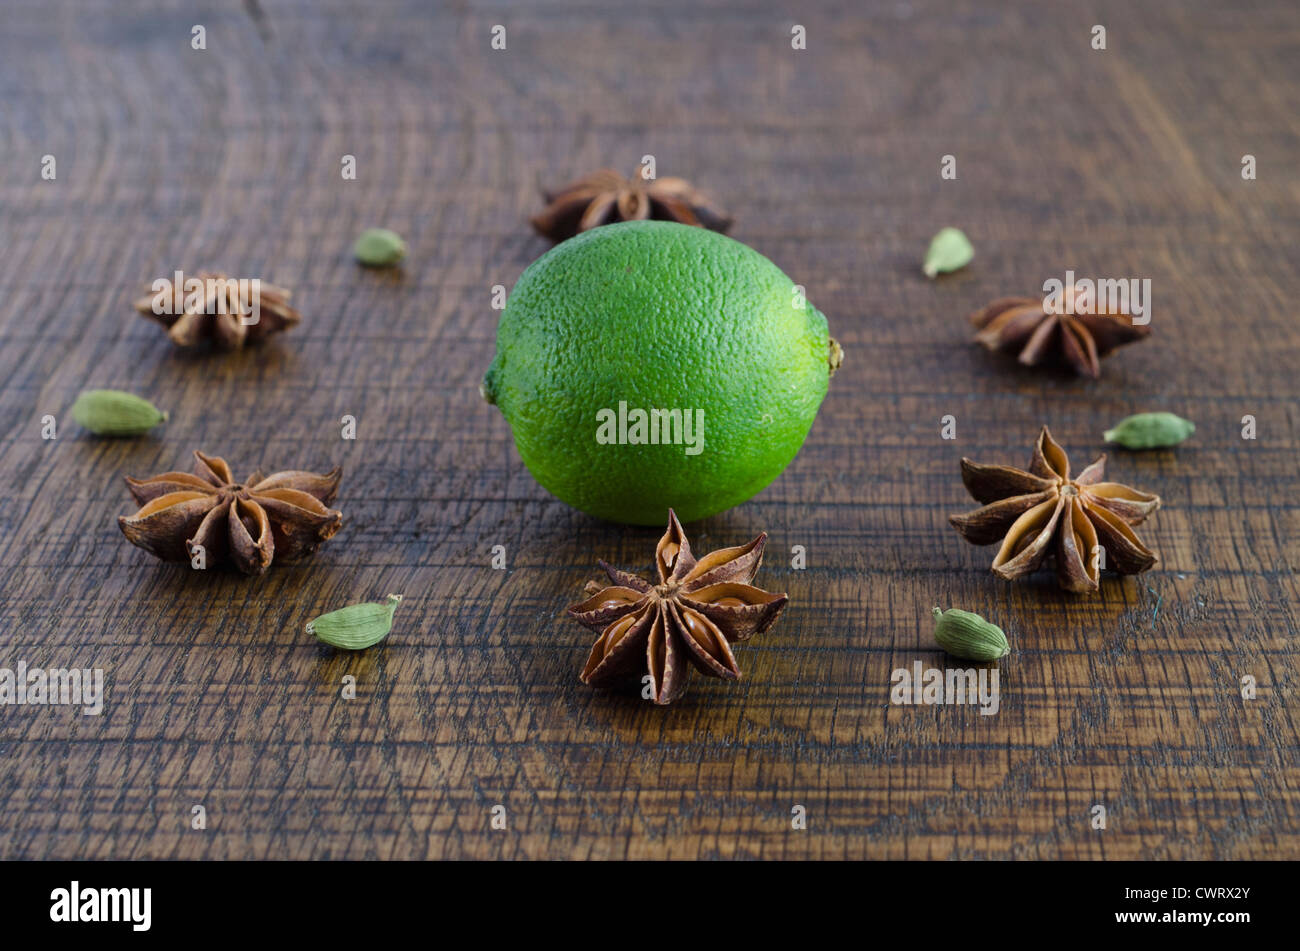 A geometric flower pattern of star anise and cardamom pods around a lime, on a dark wood surface. Stock Photo